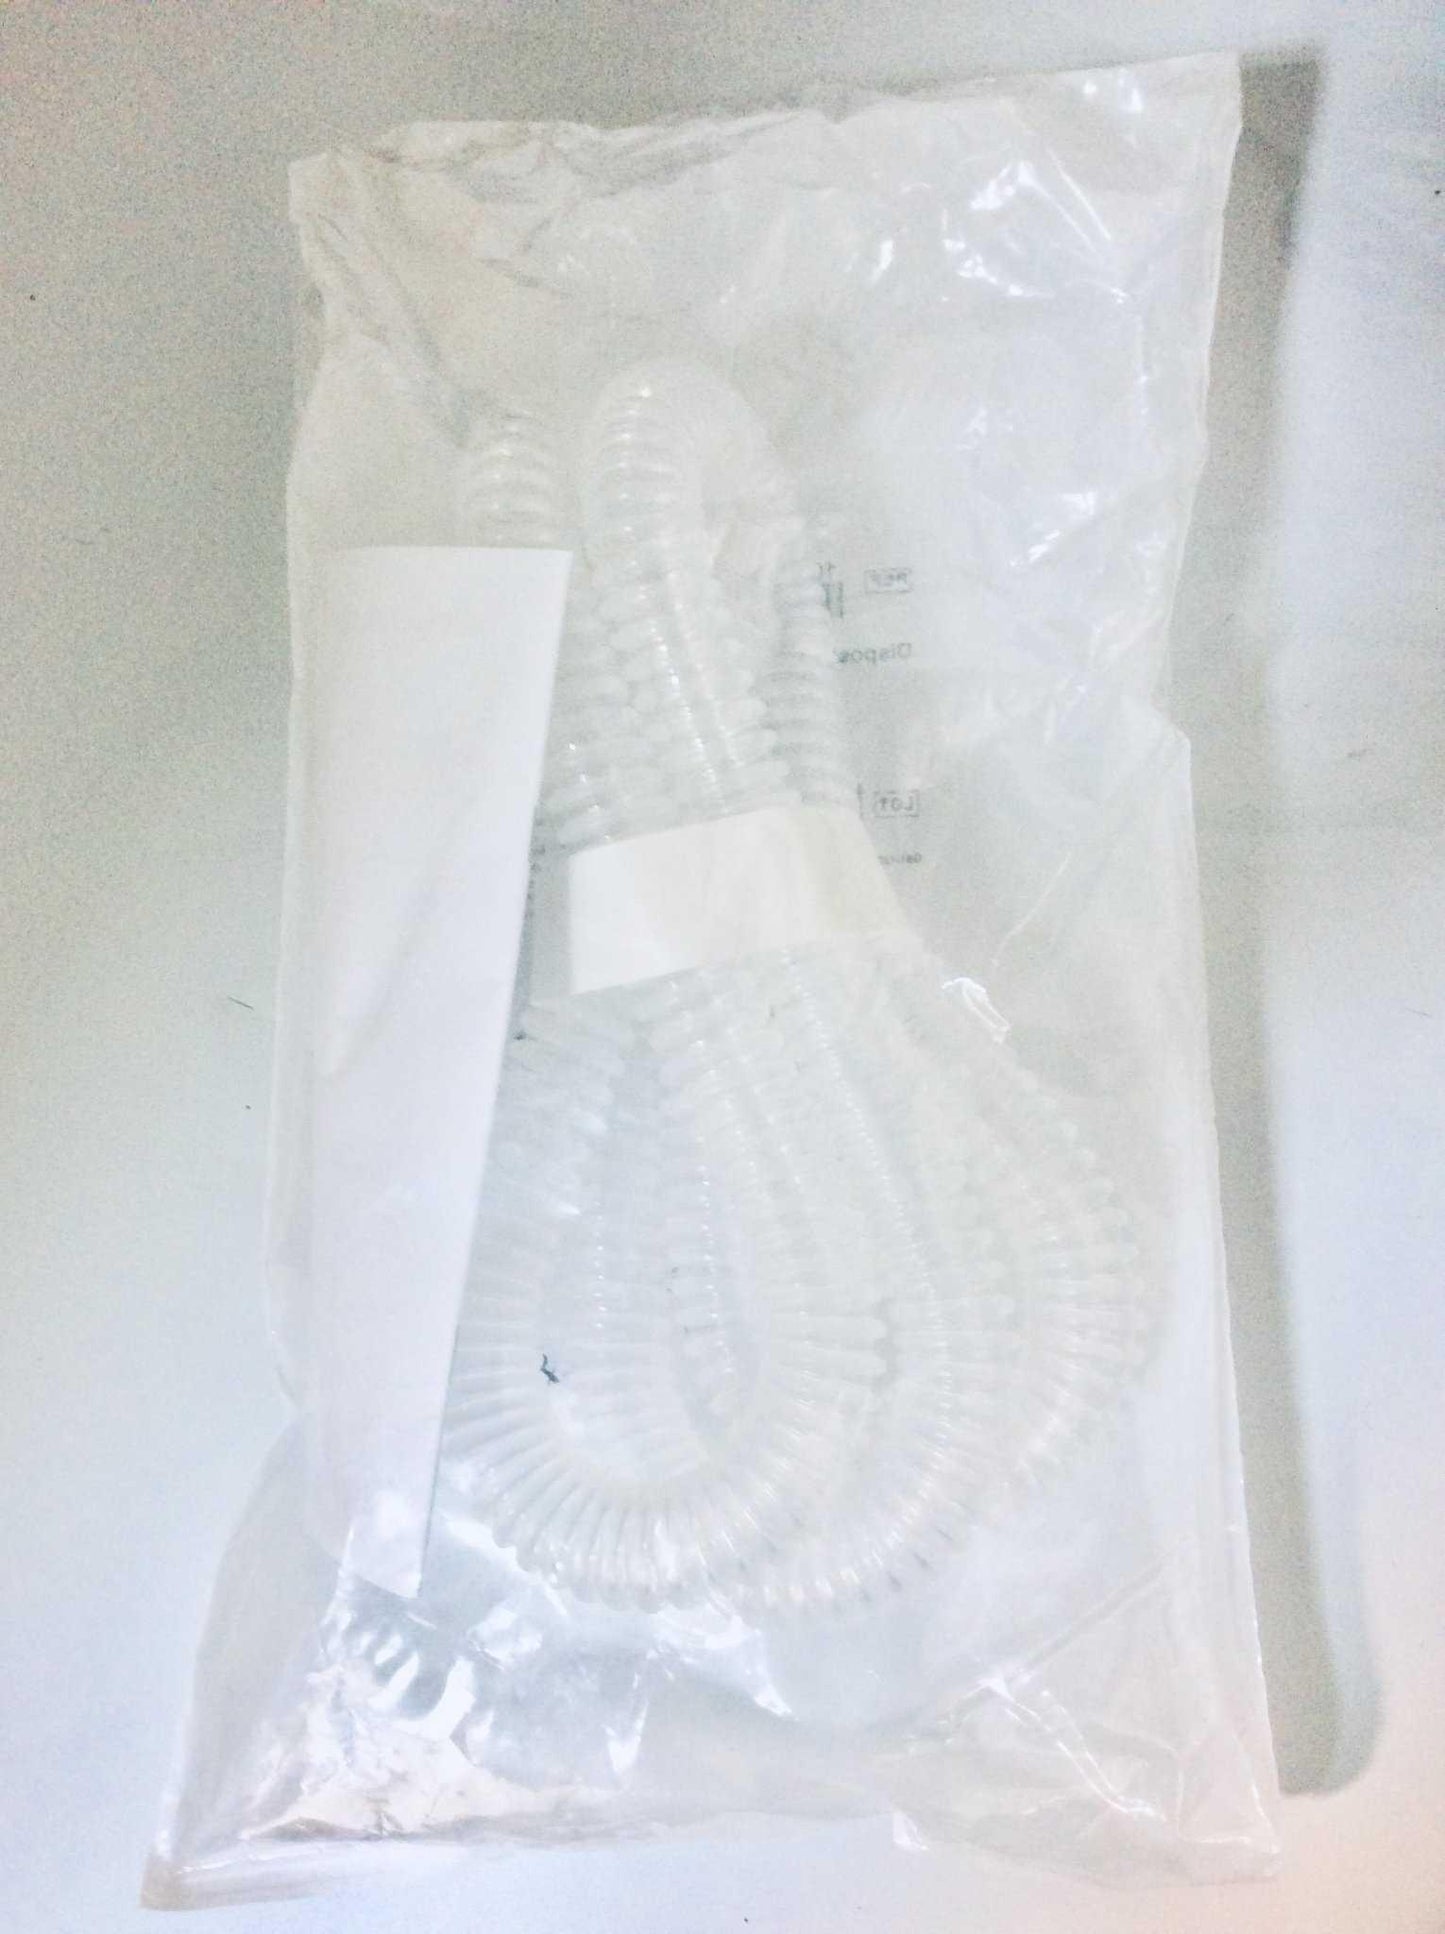 NEW Philips Respironics Disposable Adult Passive Circuit without Water Trap 1074627 FREE Shipping - MBR Medicals